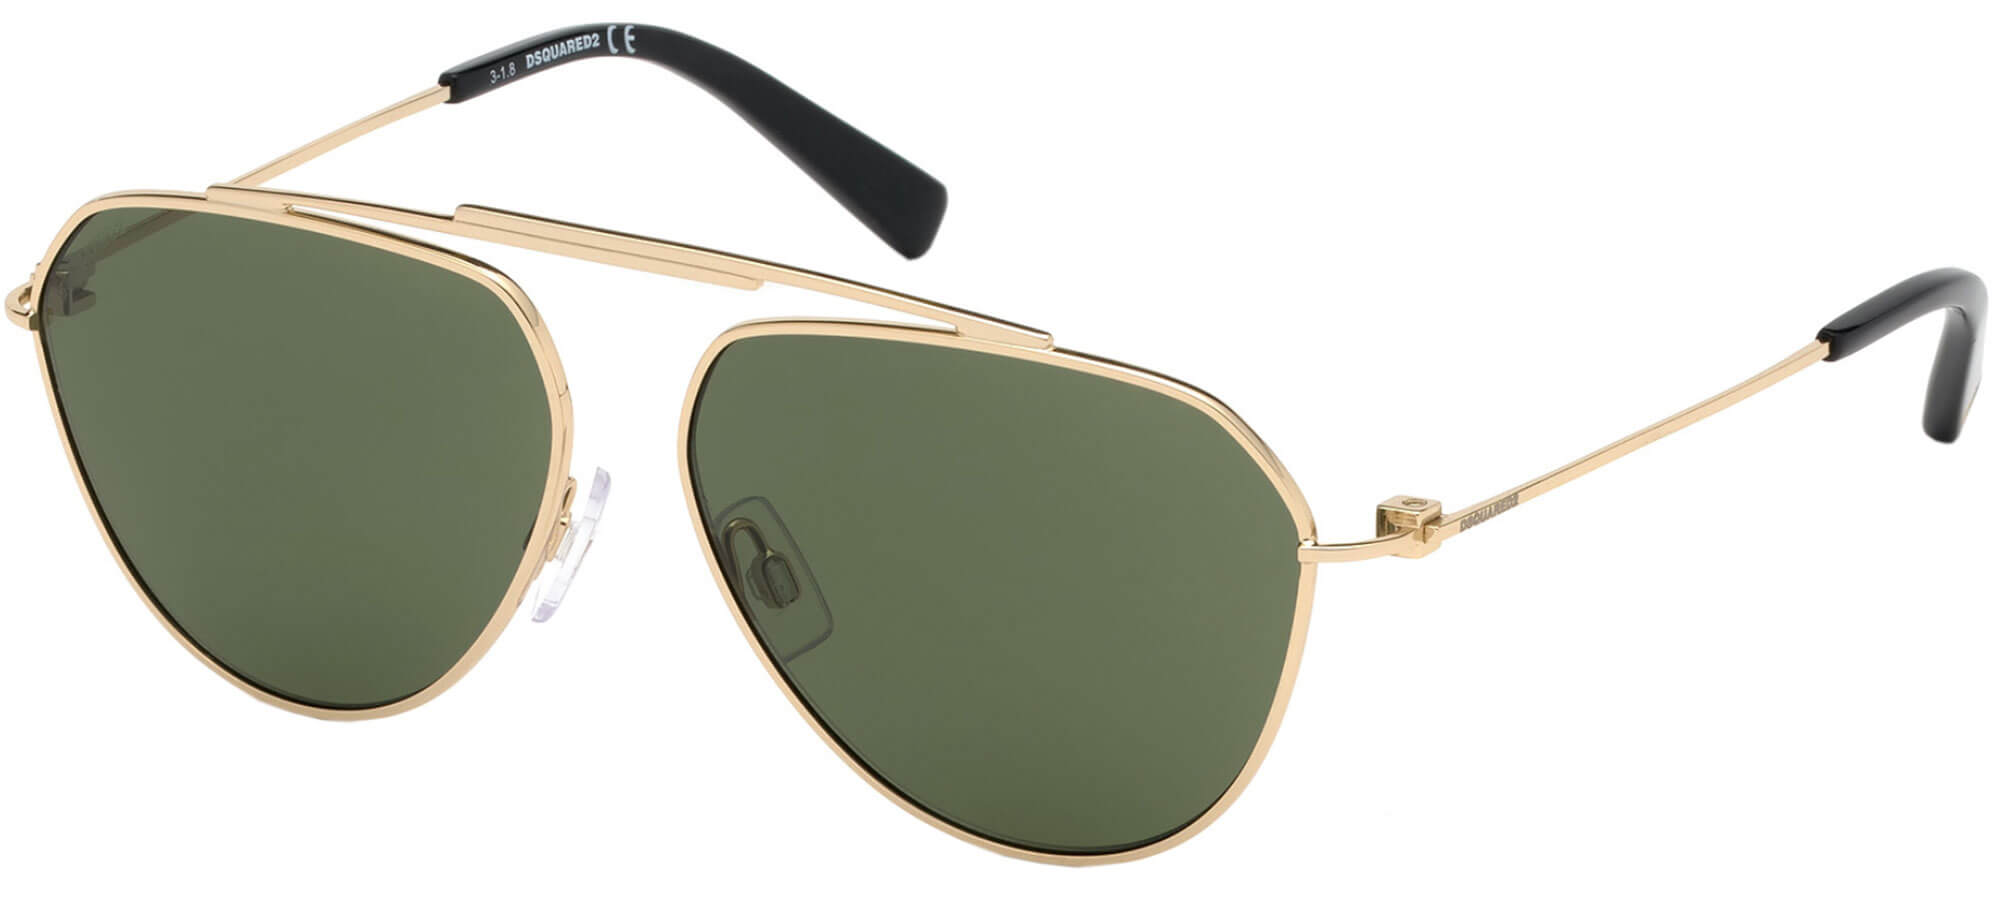 Dsquared2ZACH DQ 0310Gold/green (32N)